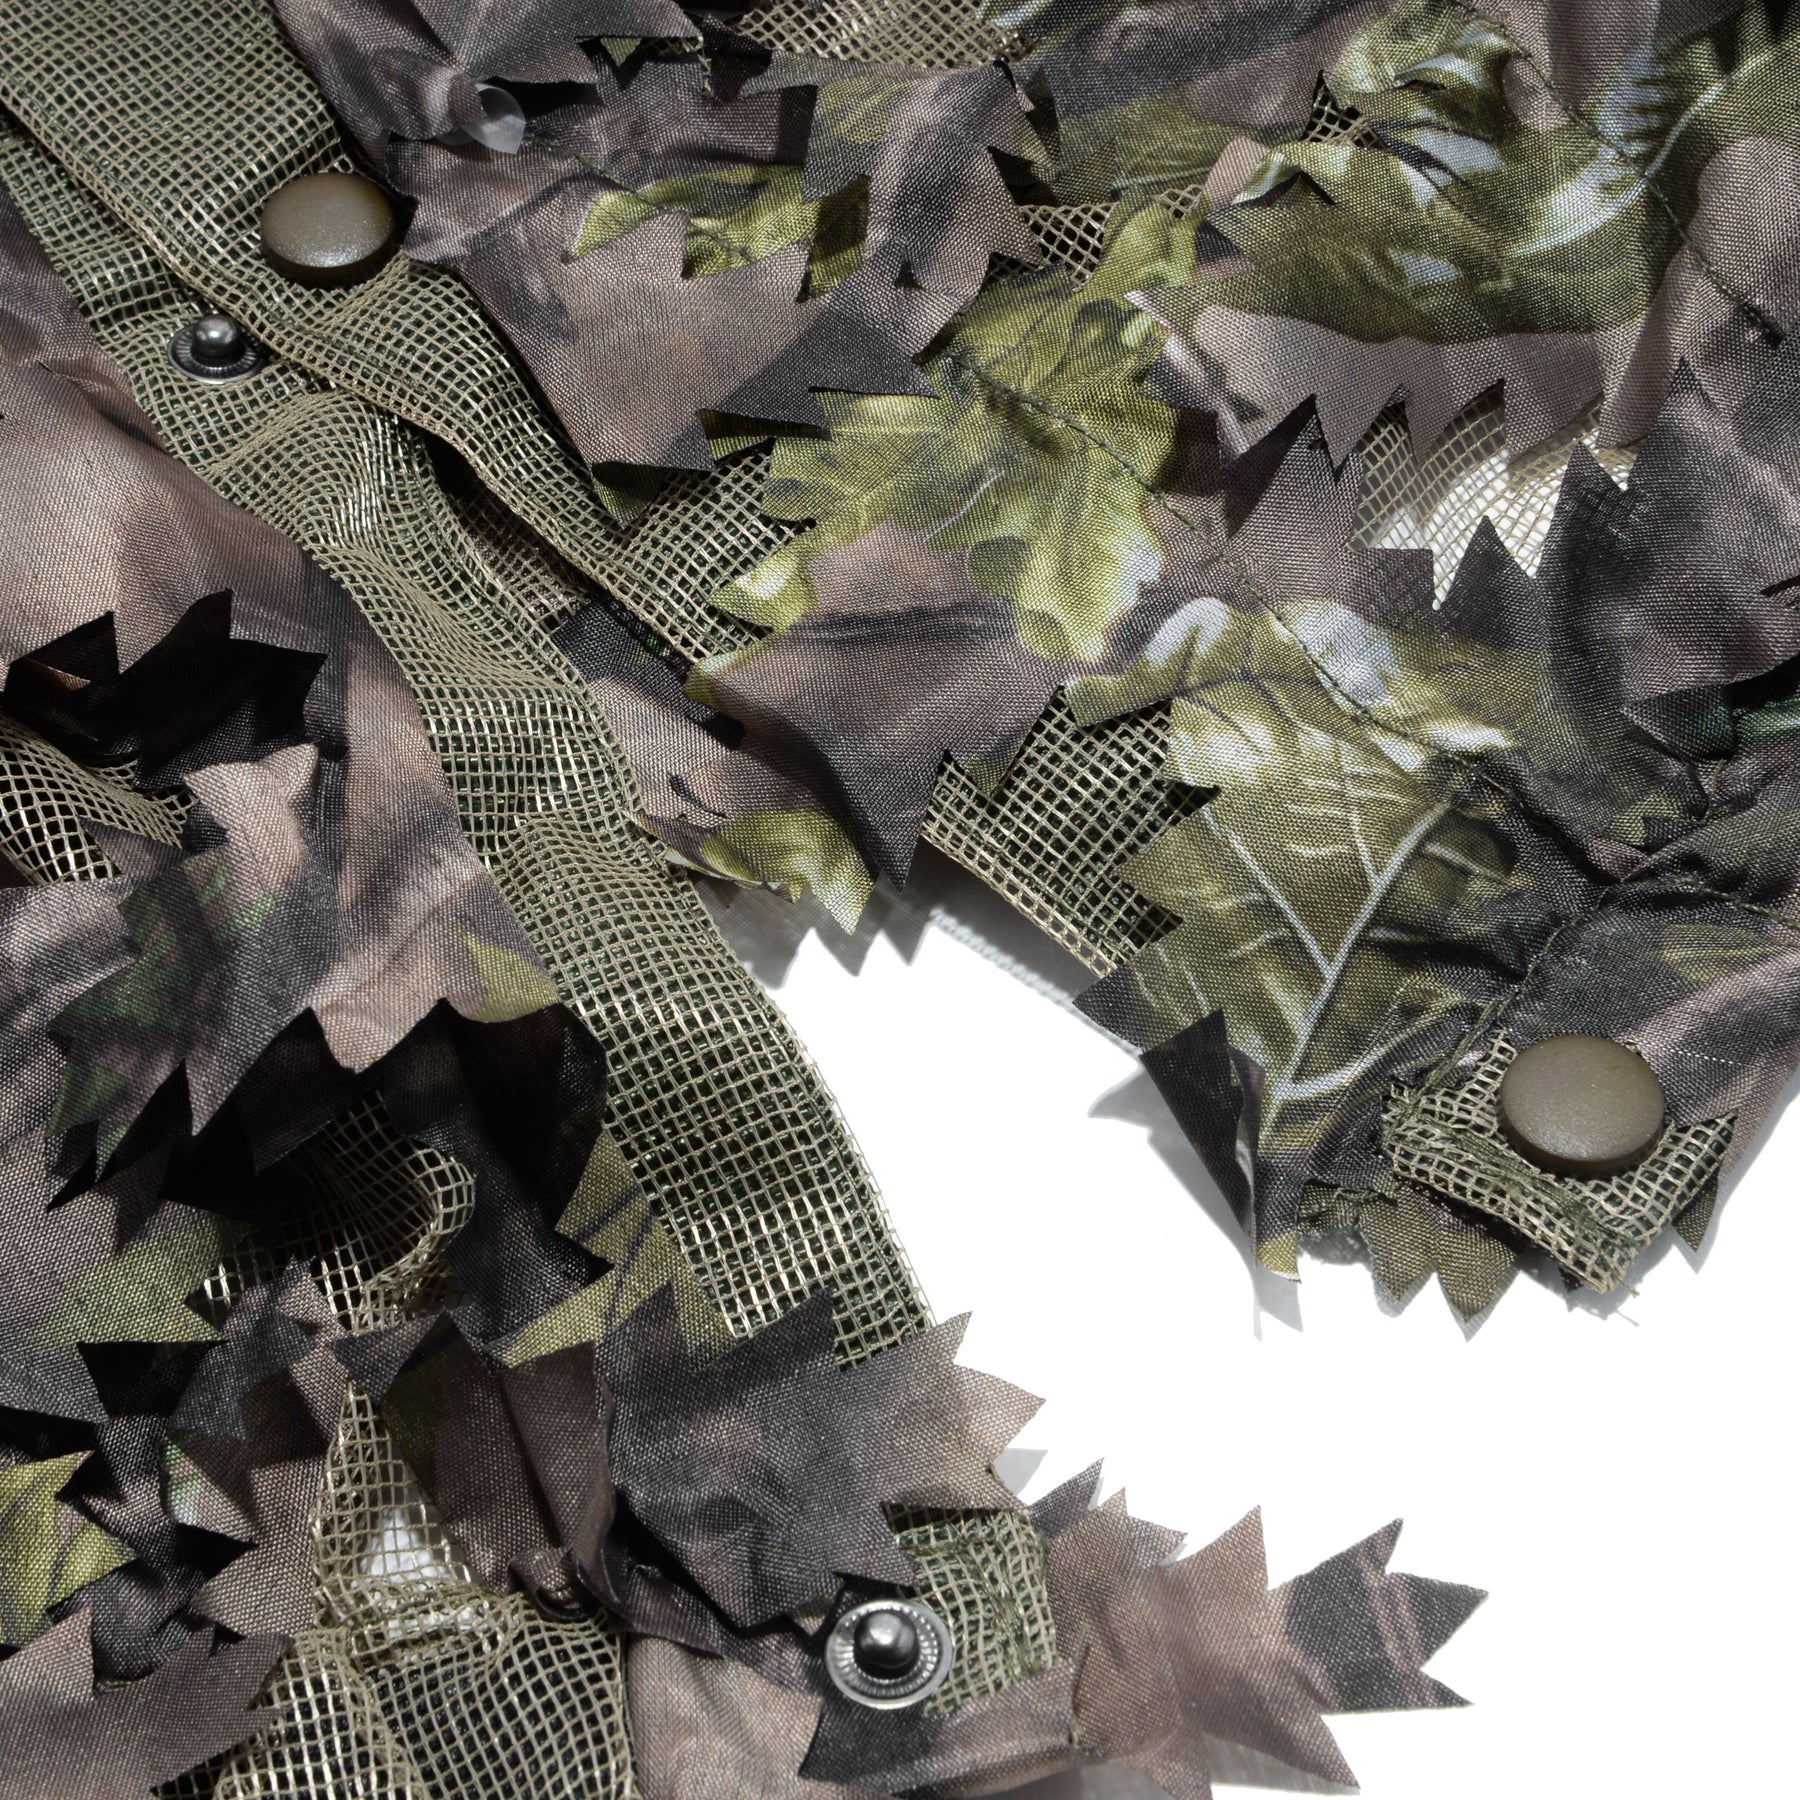 3-D Leafy Ghillie Suit - 2 Pc Woodland Camo Leafy Suit From Hot